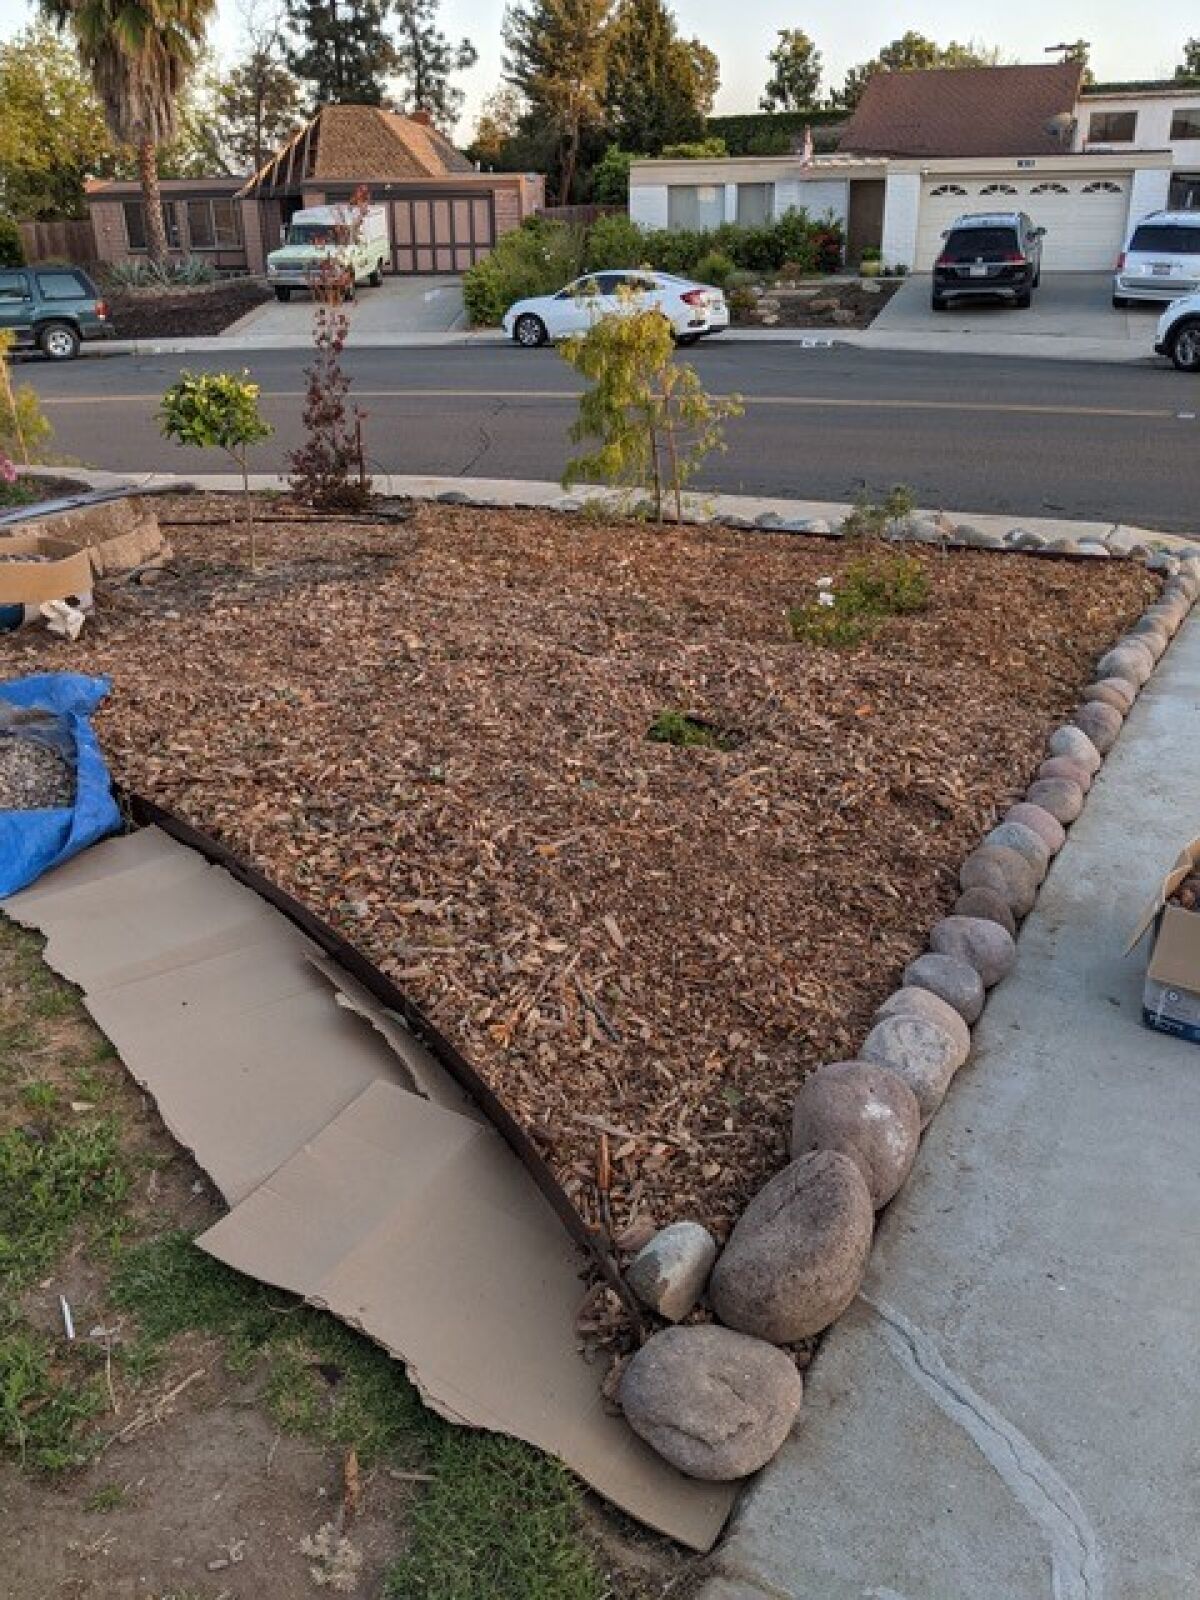 During the makeover process, Dell did sheet mulching and outlined an area for the rock path.